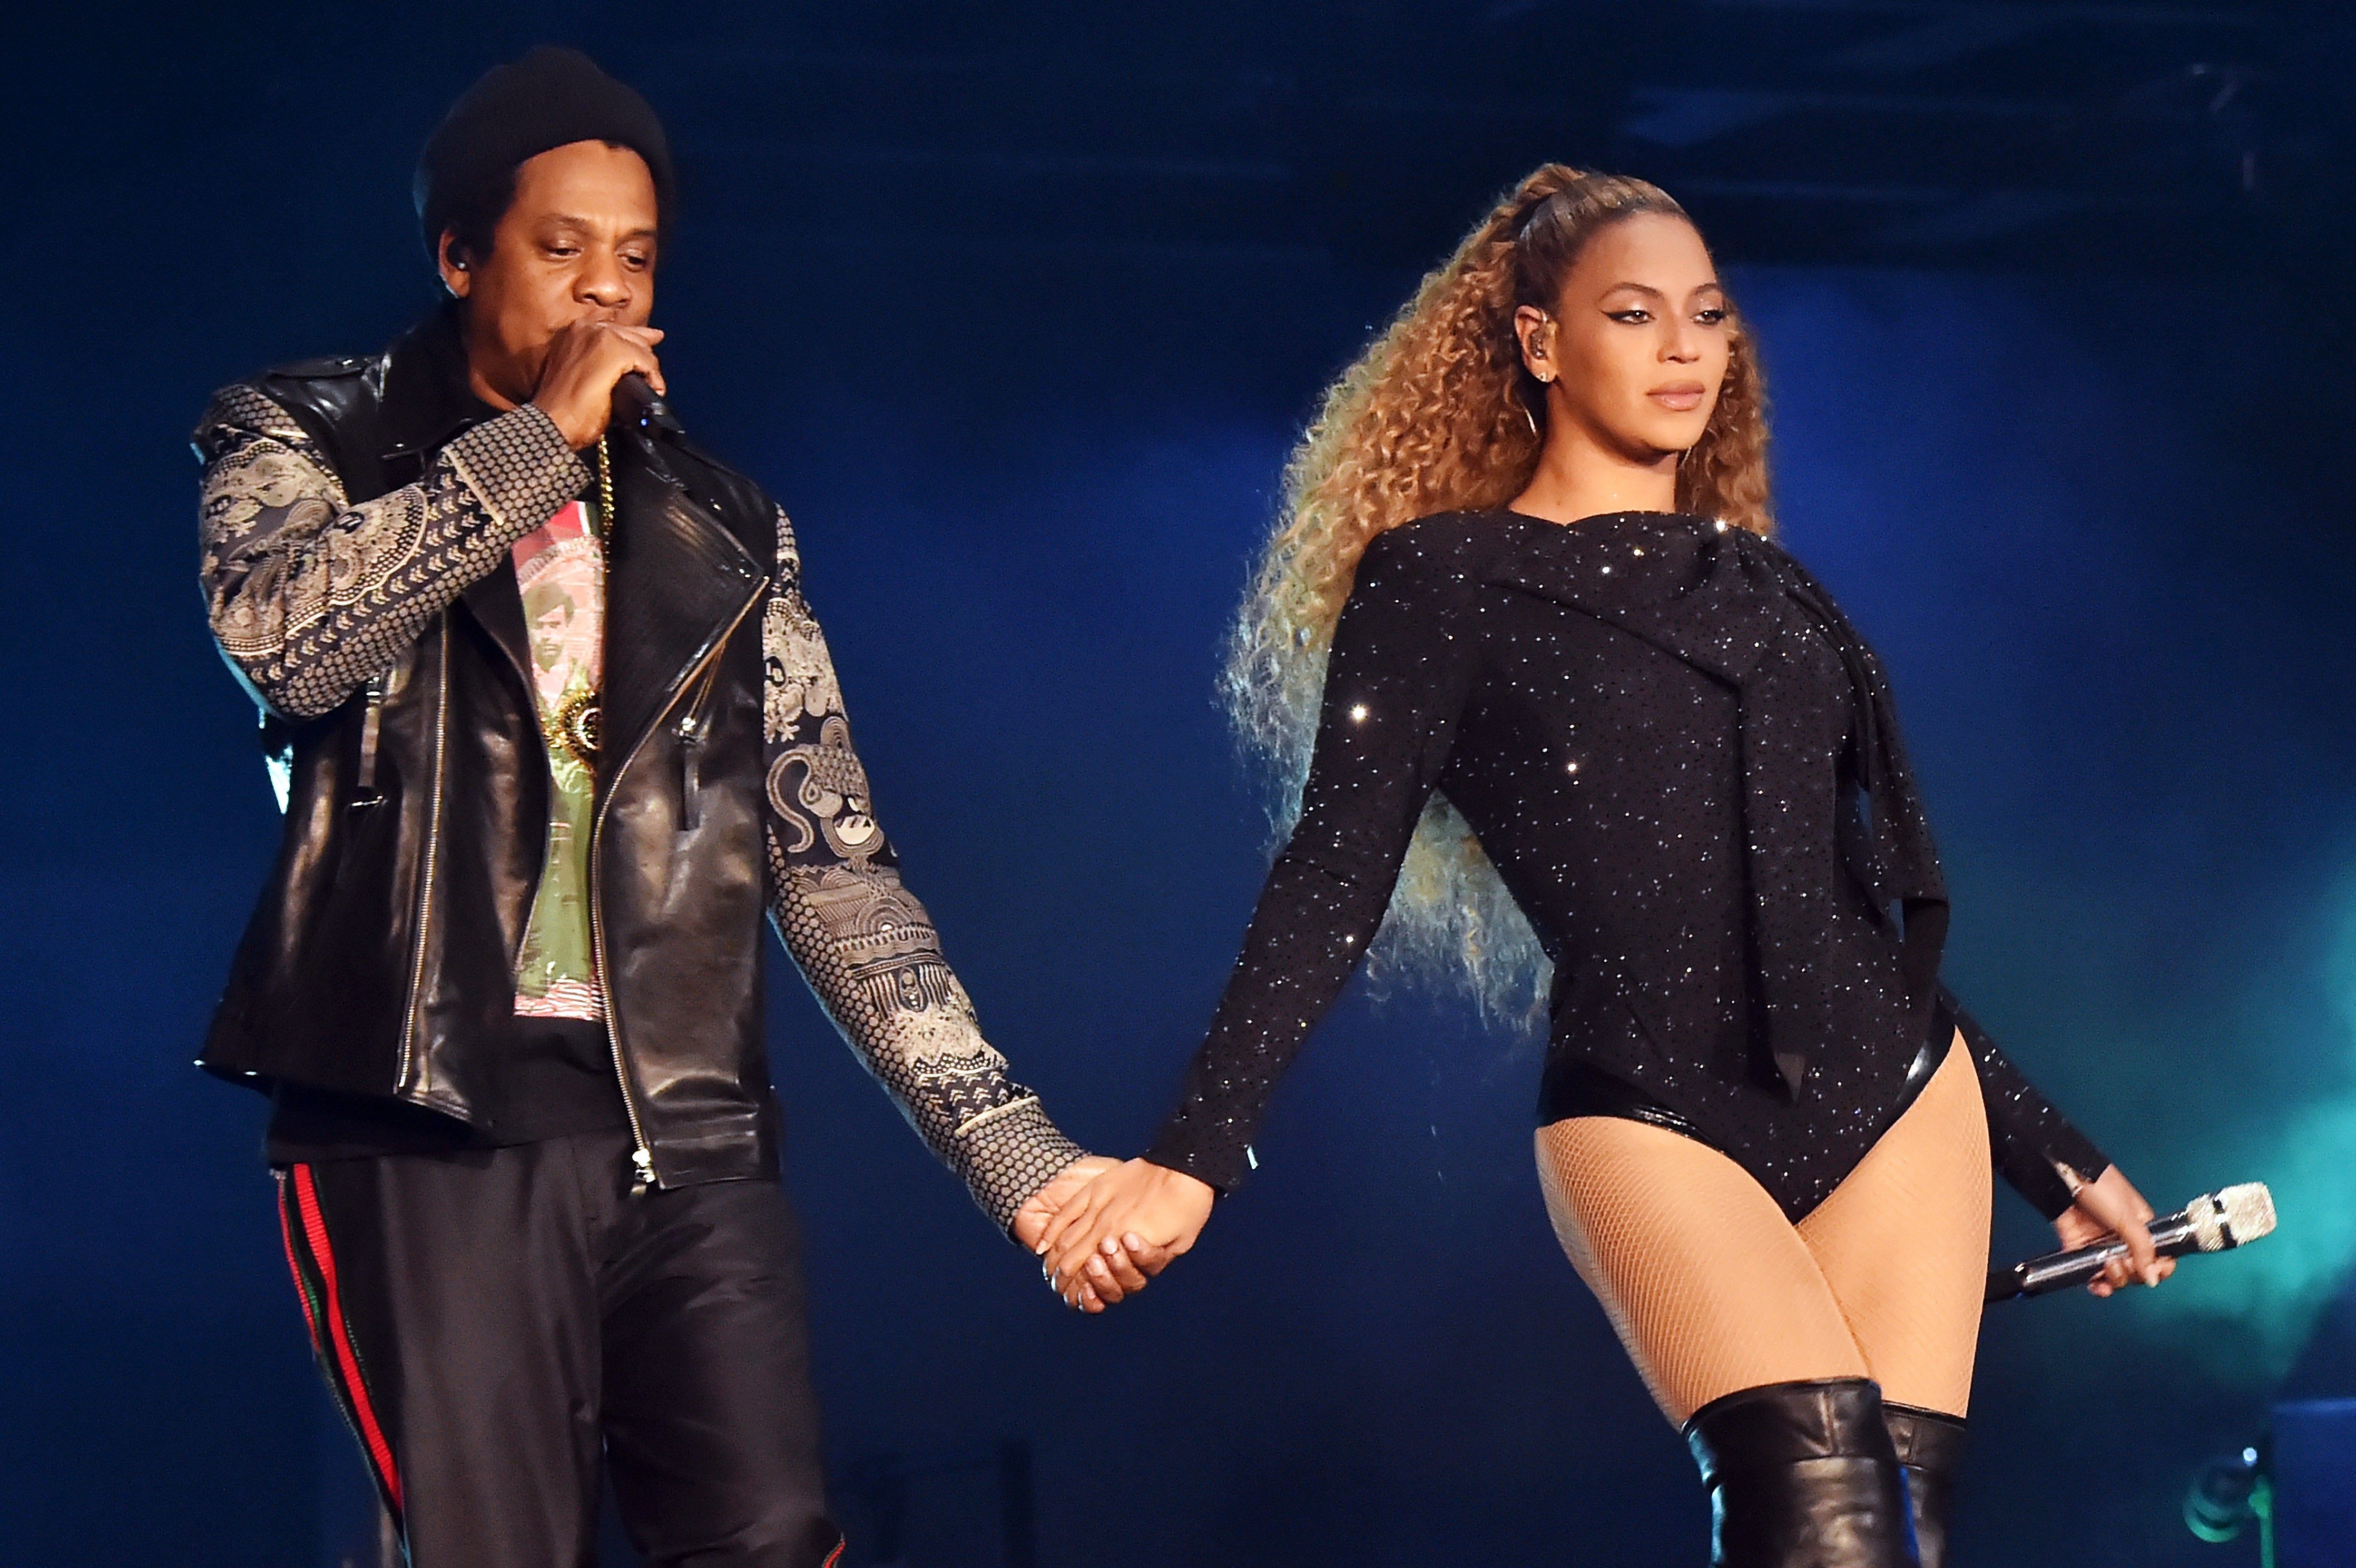 Jay-Z Brought A Friend On His First Date With Beyoncé
